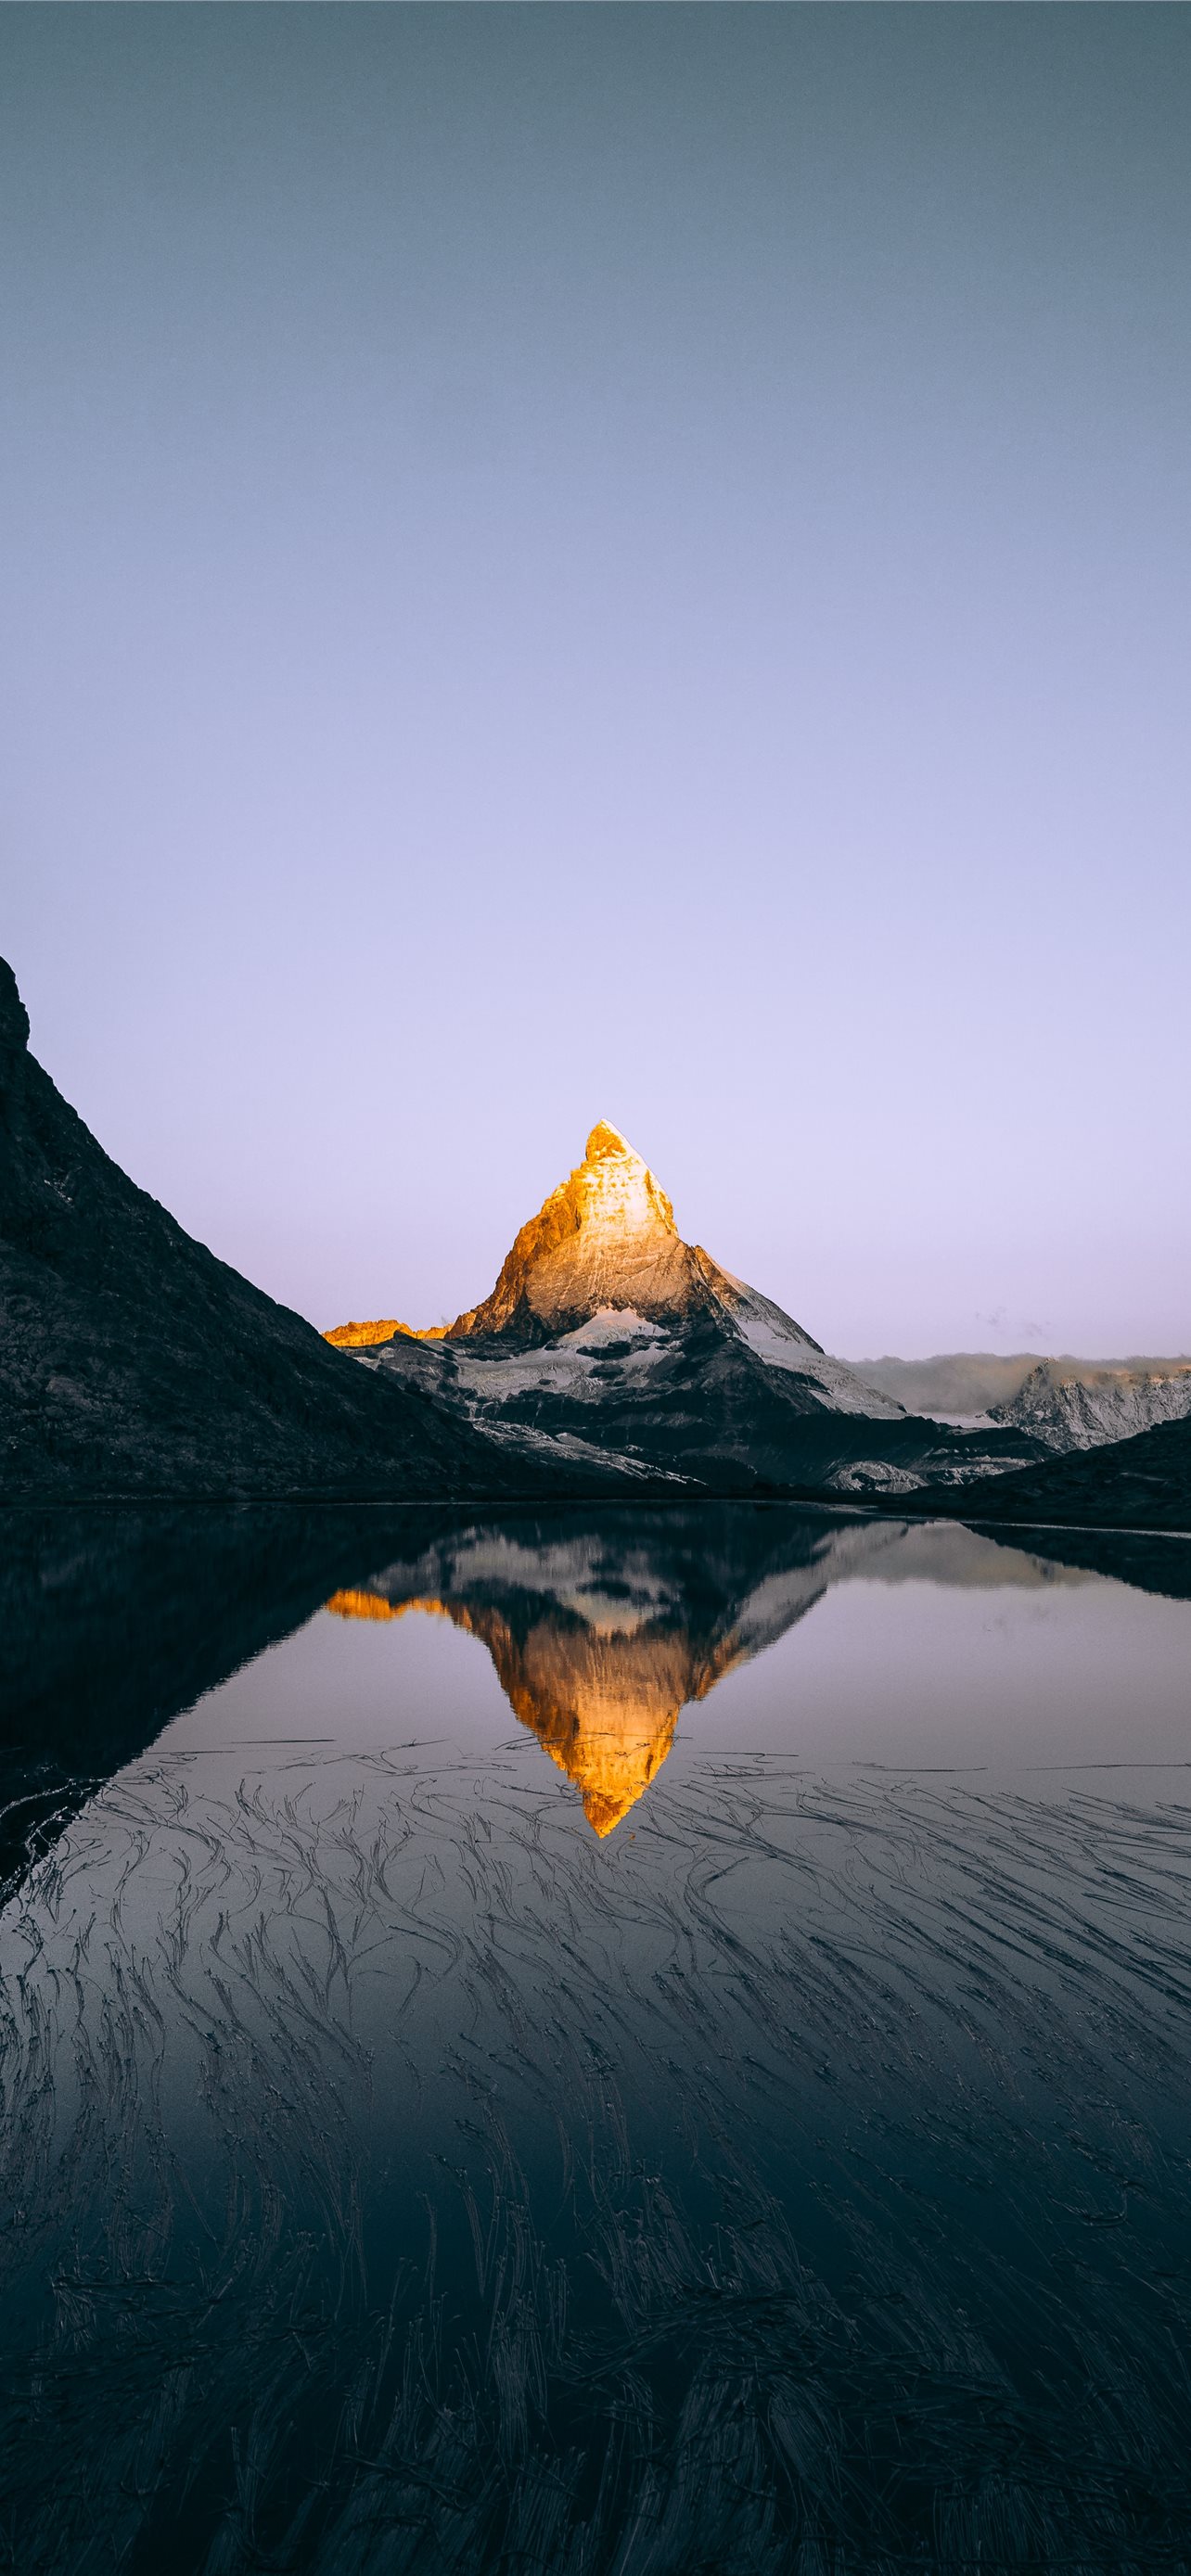 A mountain reflected in the water - Clean